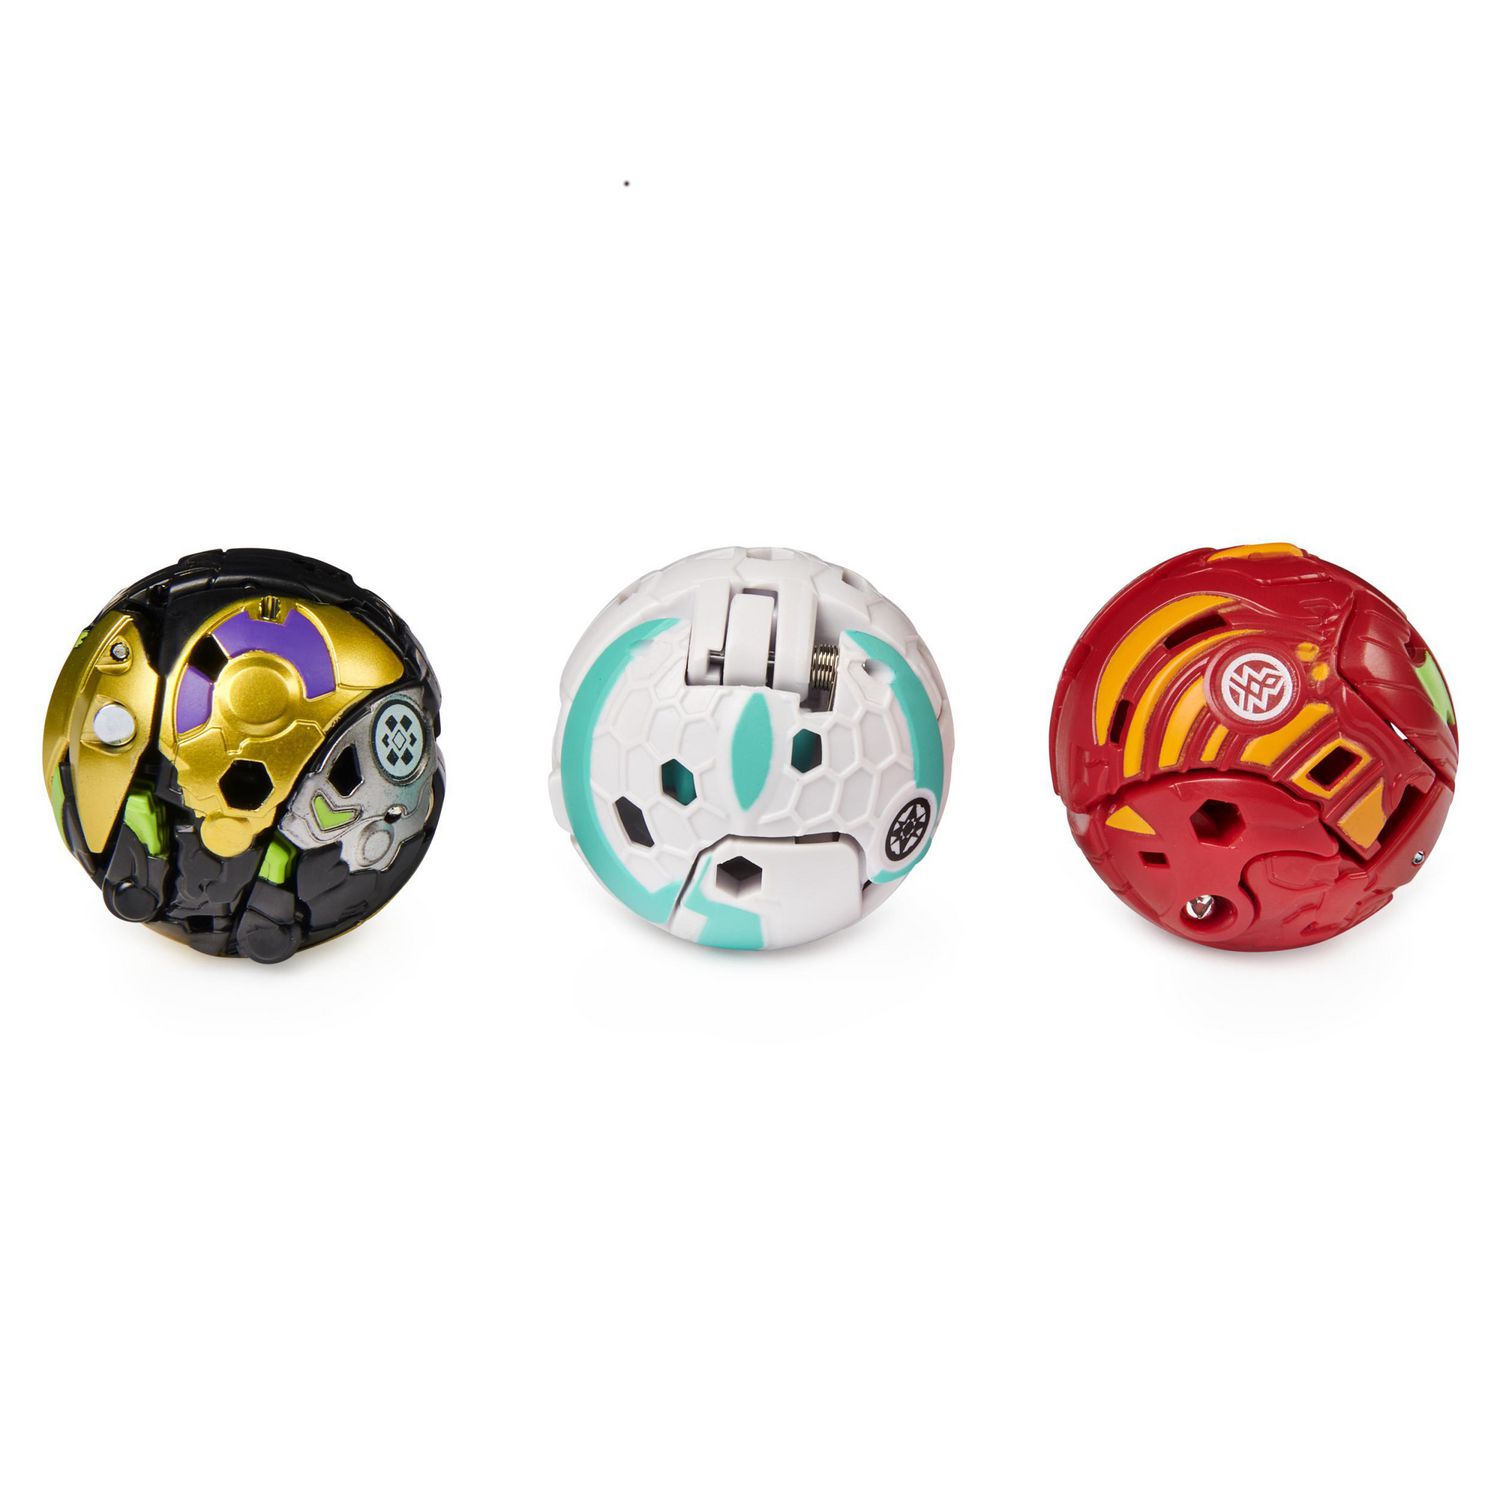 Fused Hydorous x Thryno Ultra Bakugan Starter Pack 3-Pack Armored Alliance Collectible Action Figures 